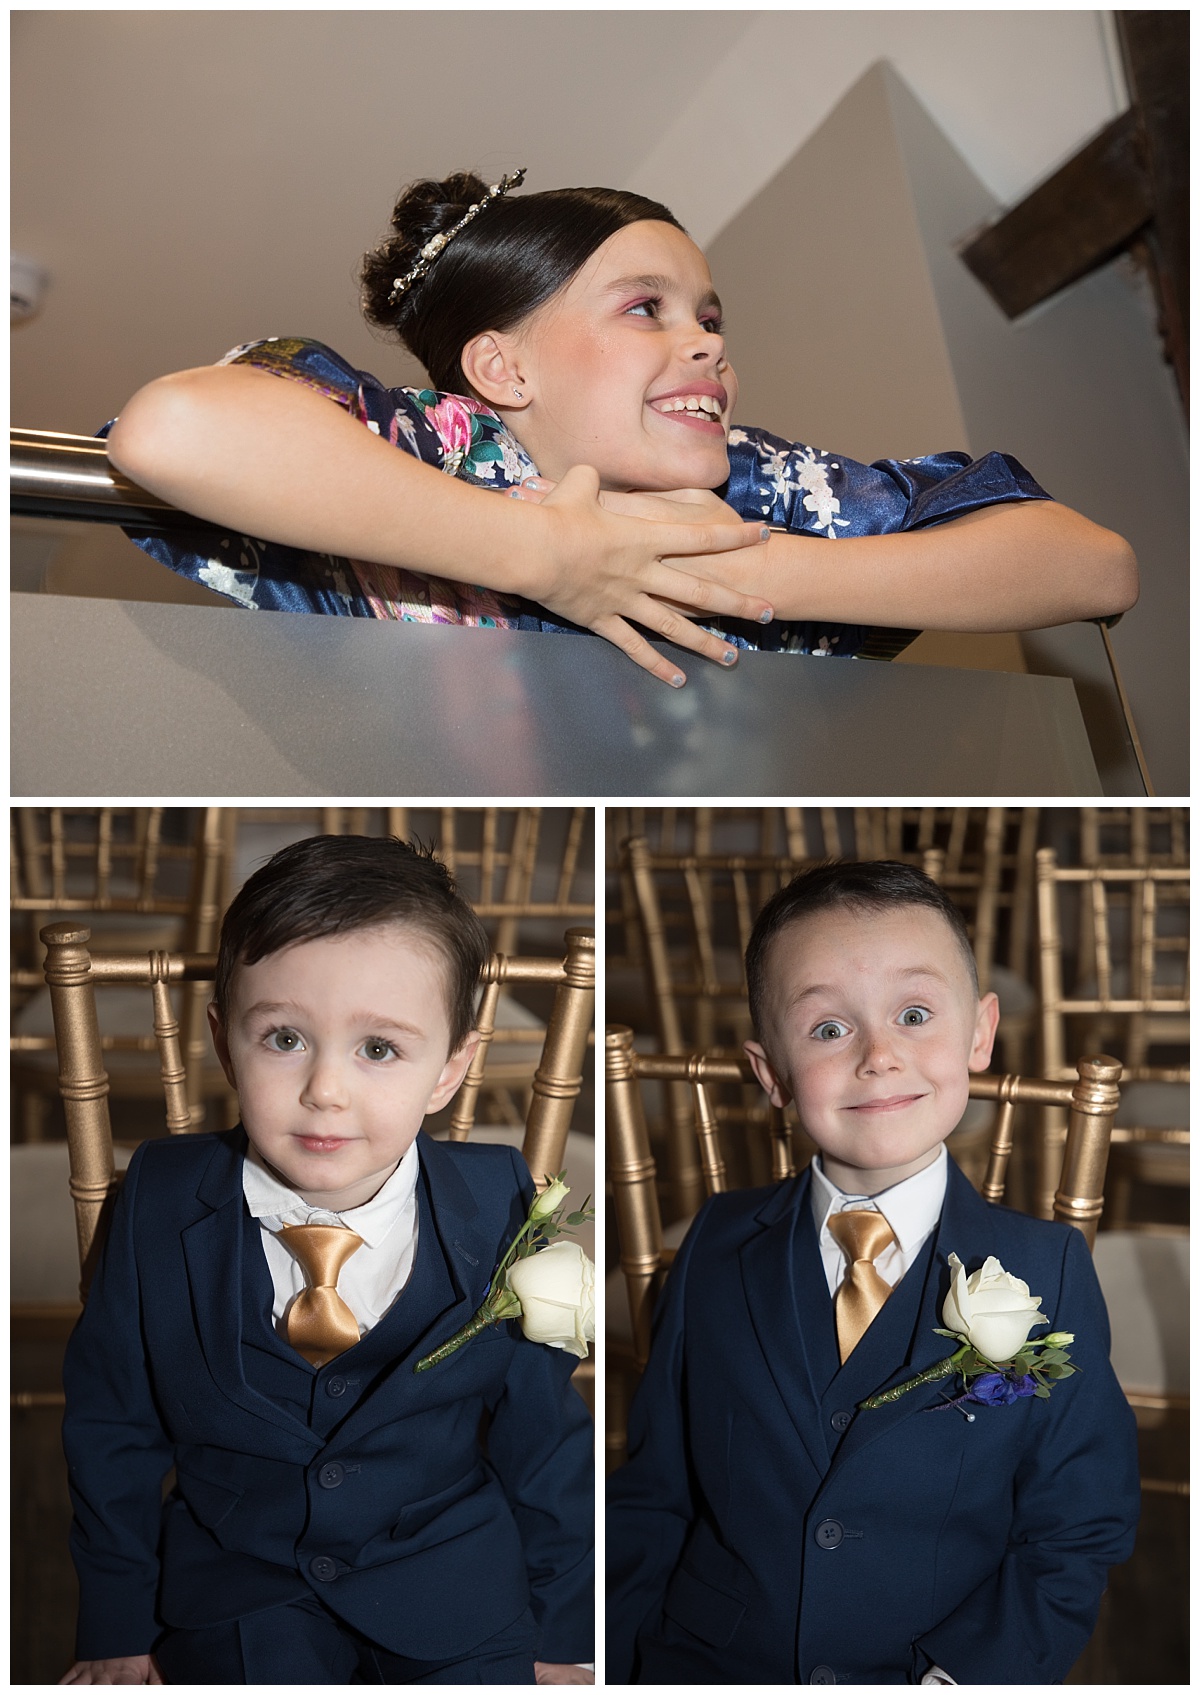 Wedding Photography Manchester - Jemma and Mark's Oddfellows On The Park NYE Wedding 23